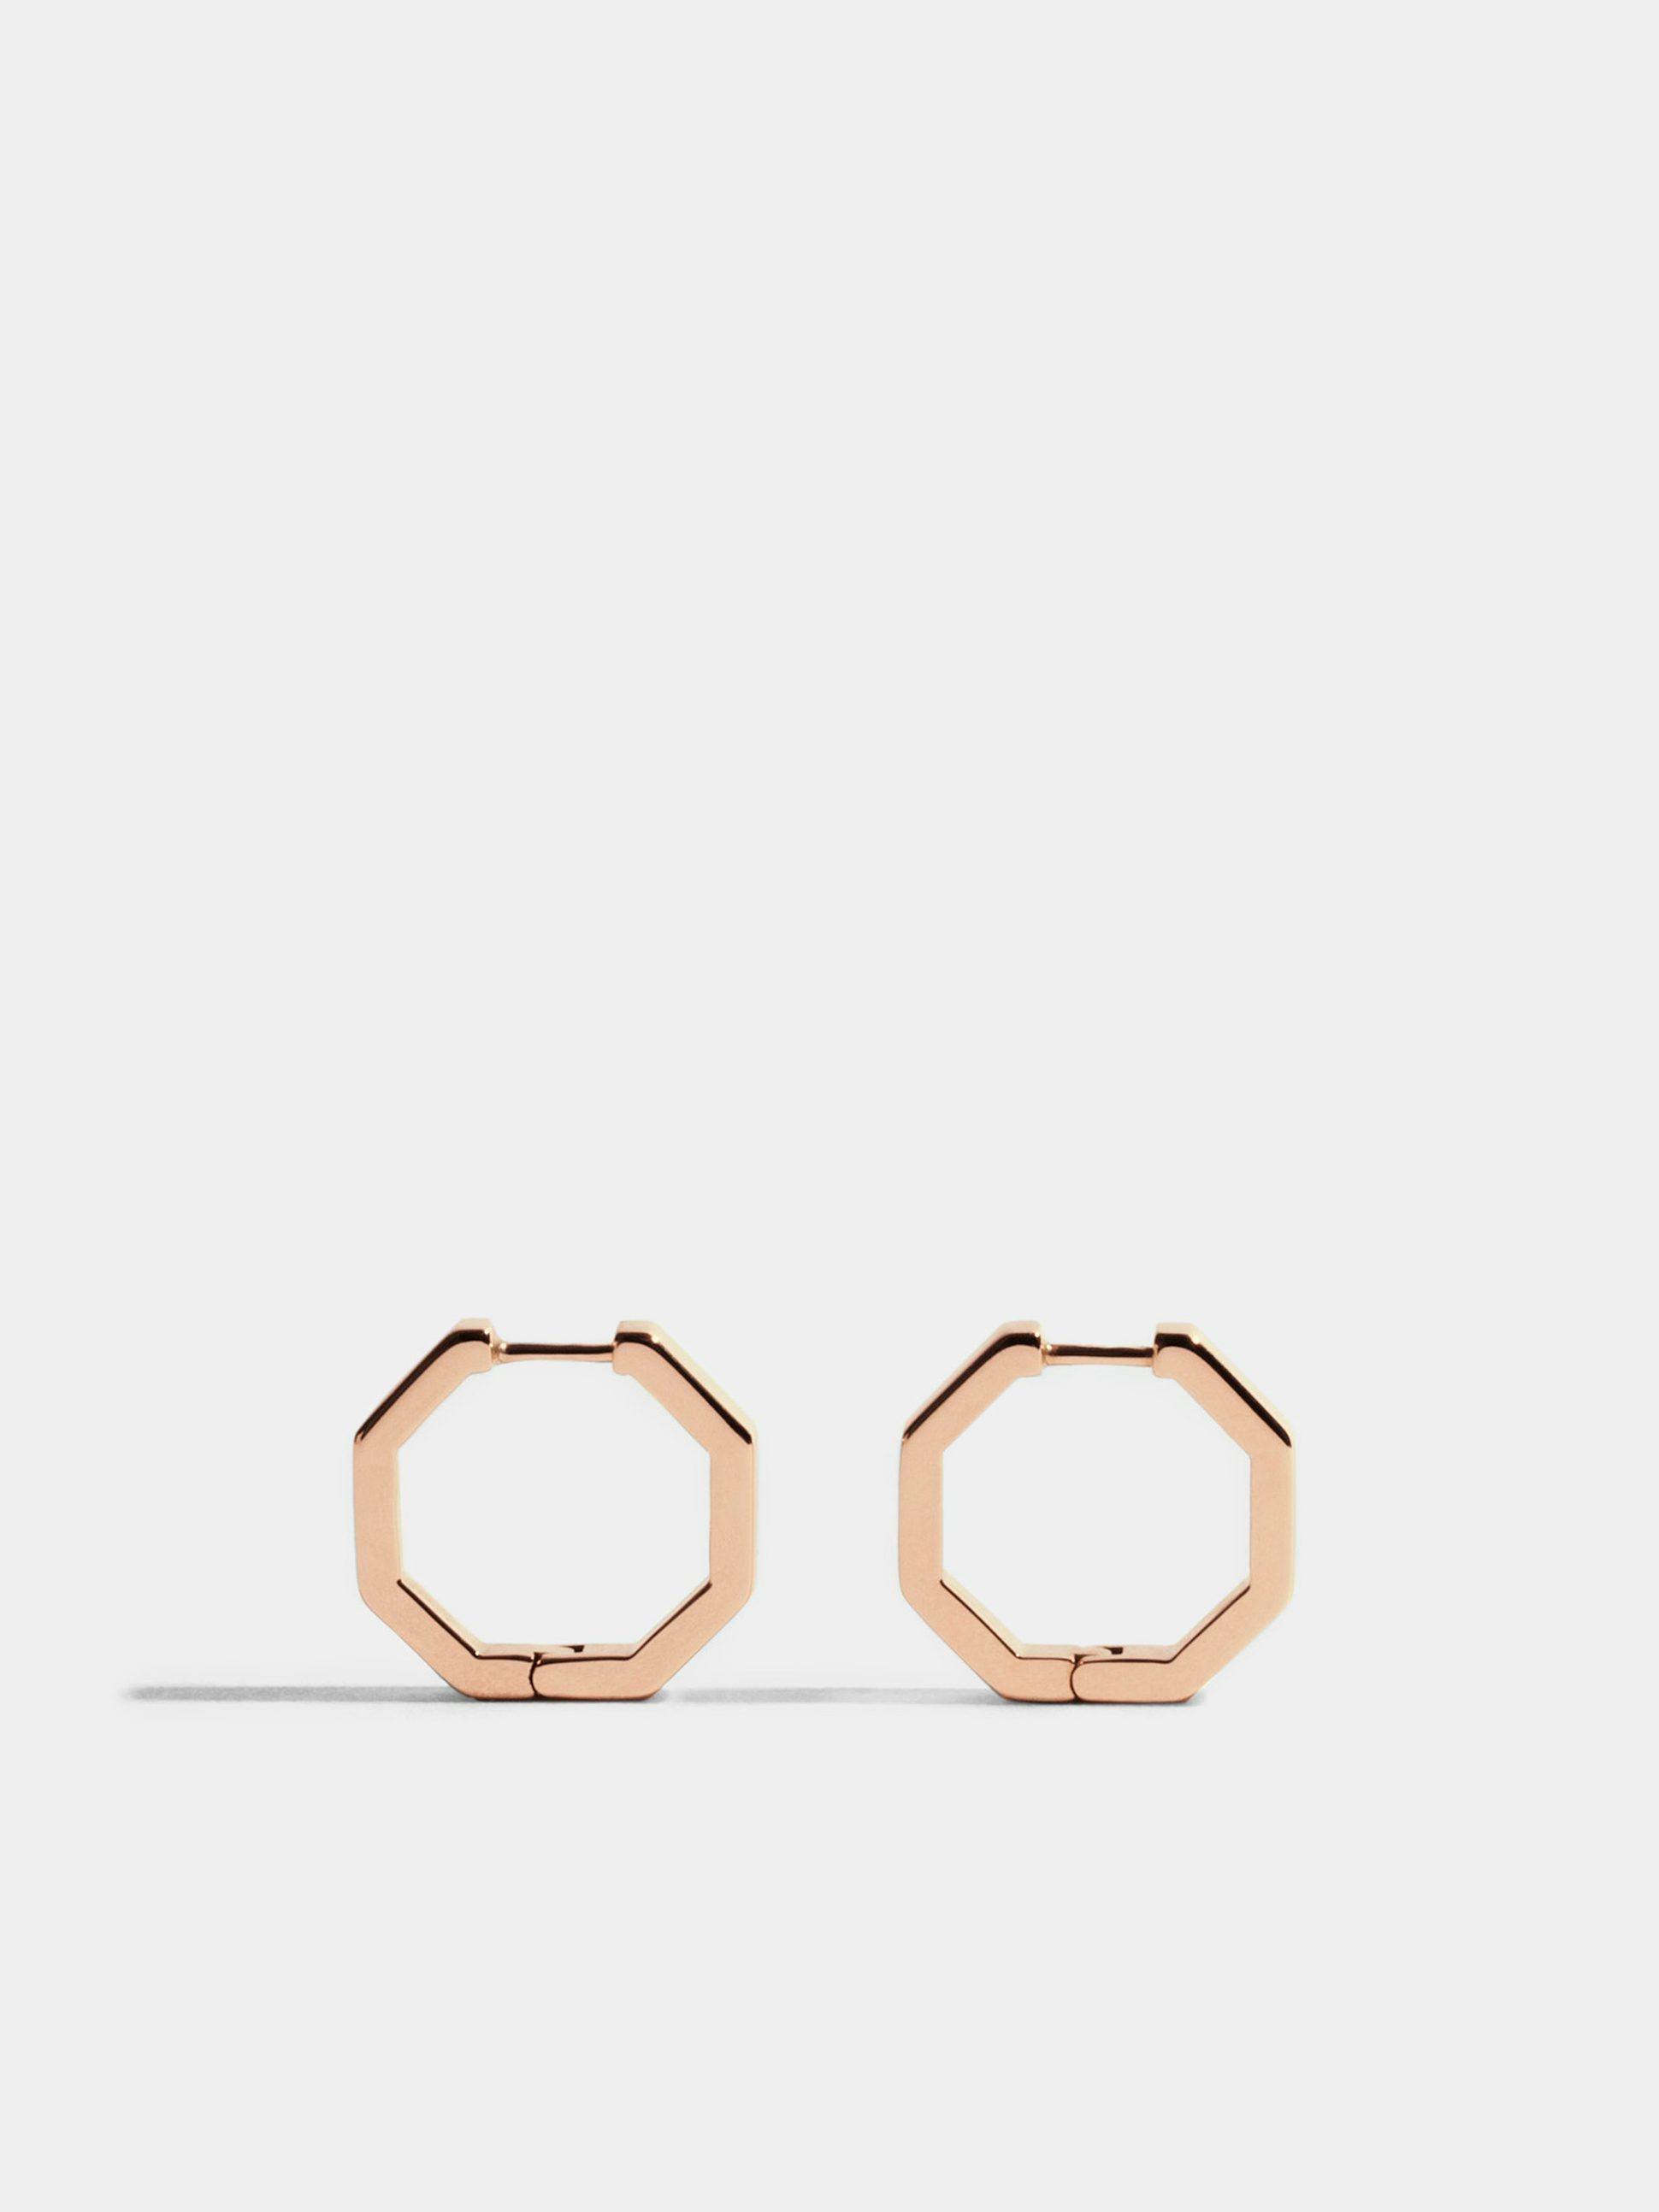 Octogone 13mm earrings in 18k Fairmined ethical rose gold, the pair.